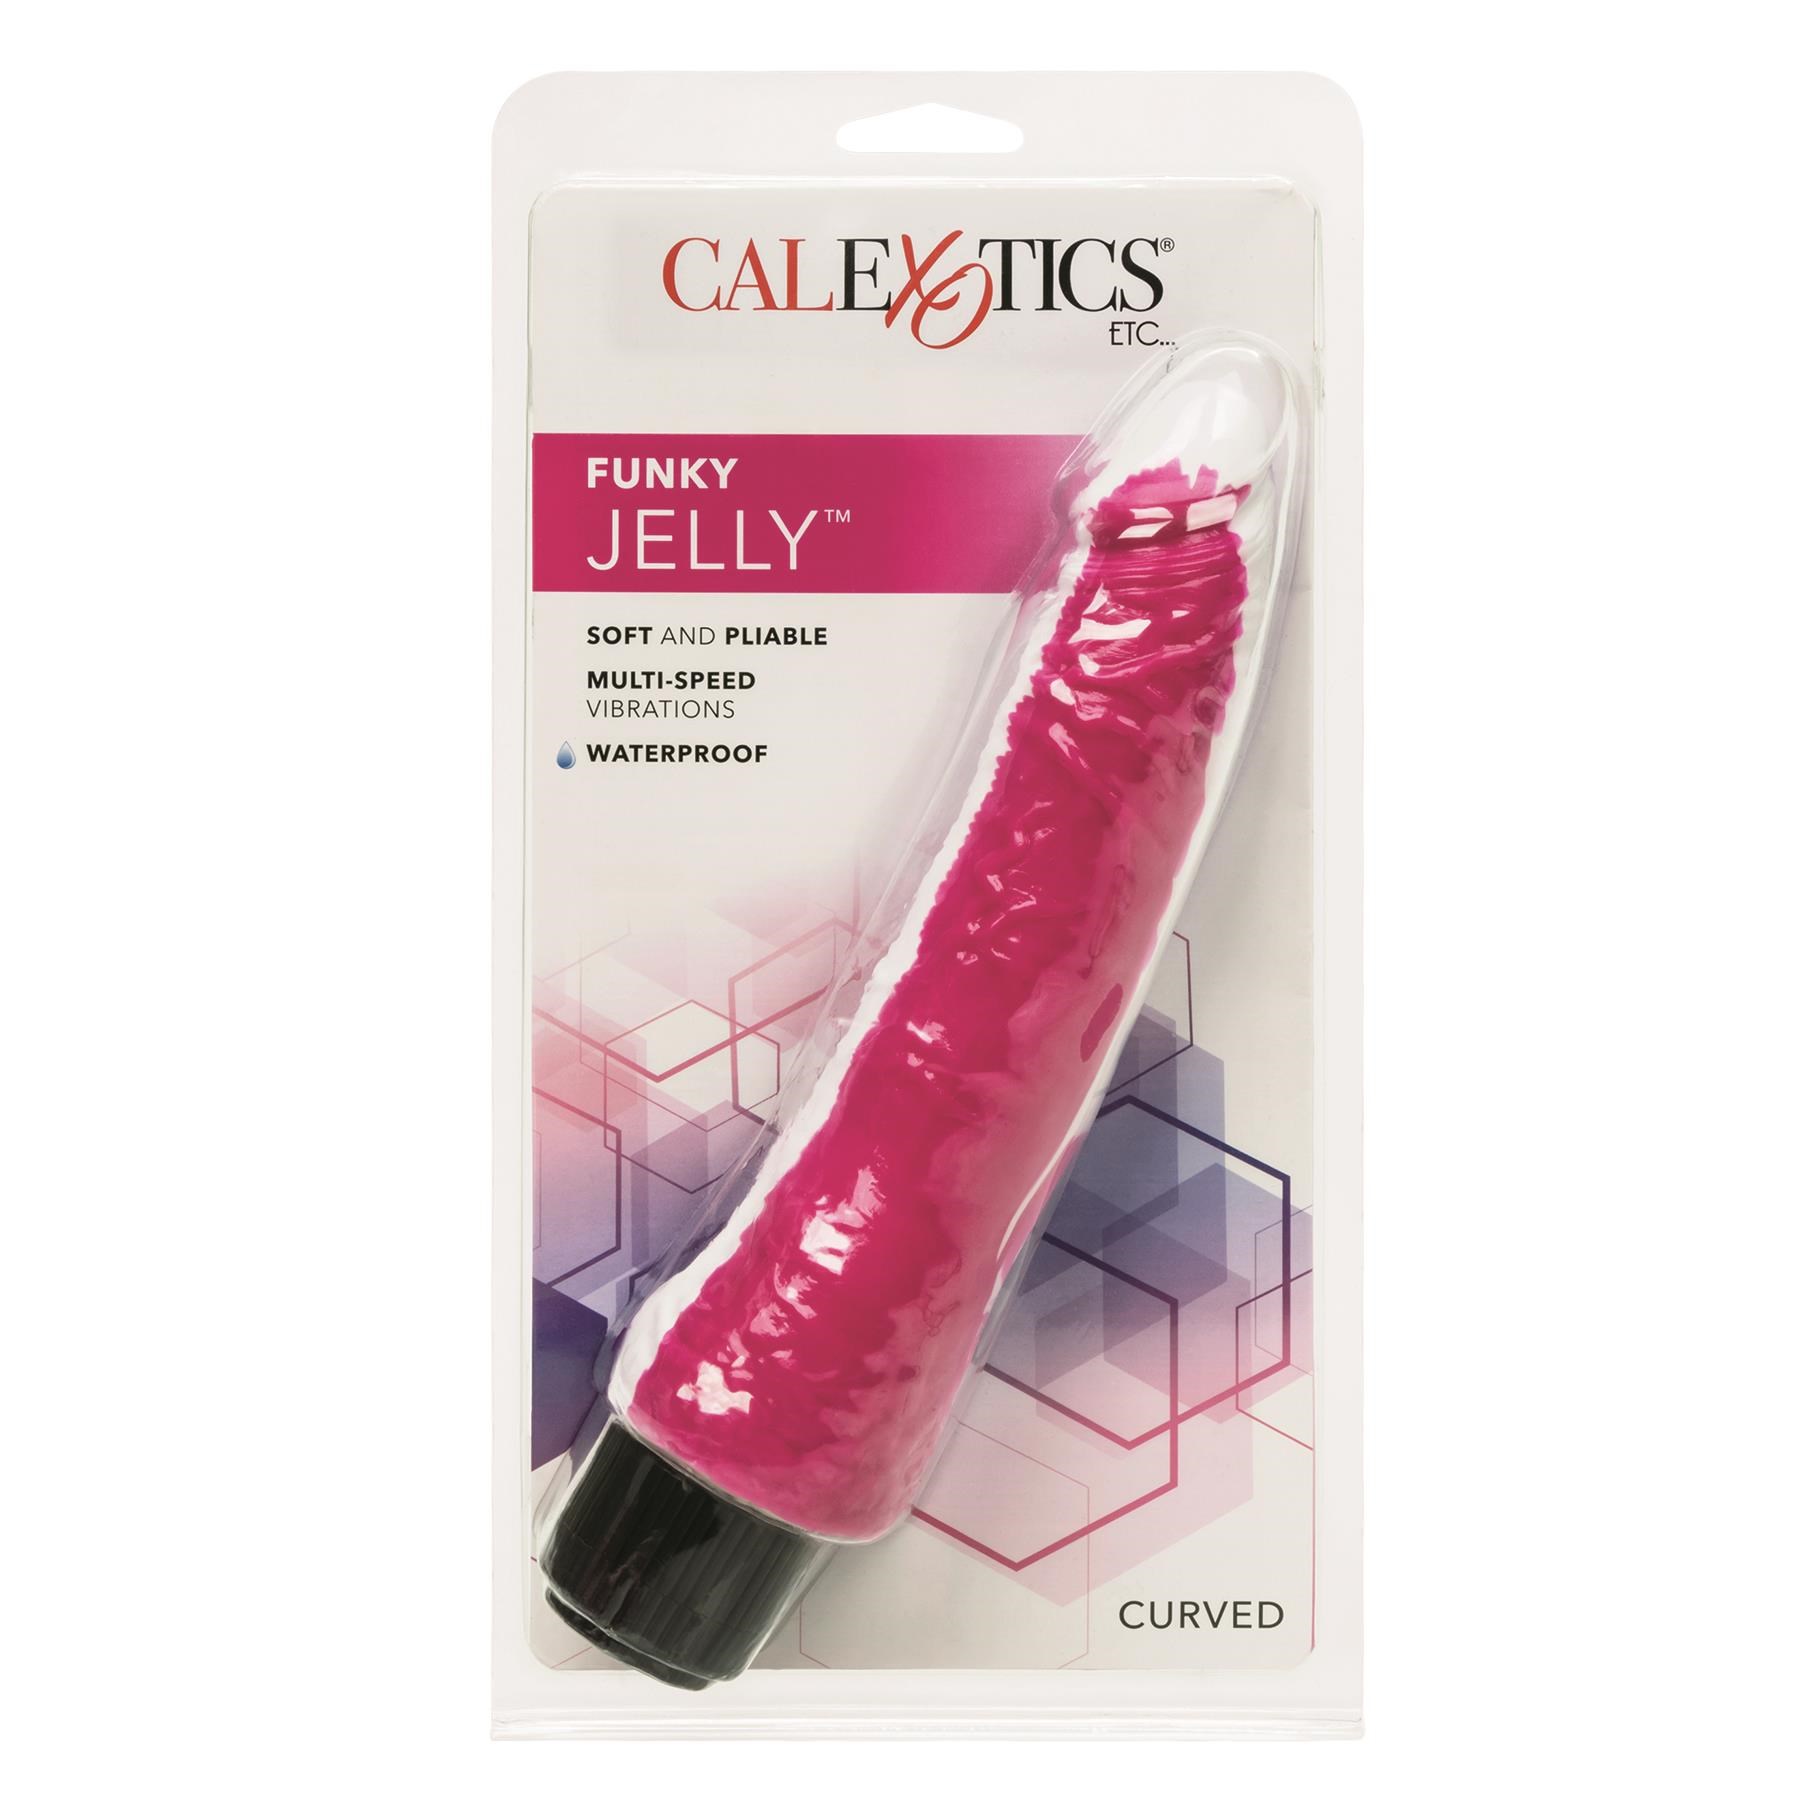 Funky Jelly Curved Vibrating Dildo Packaging